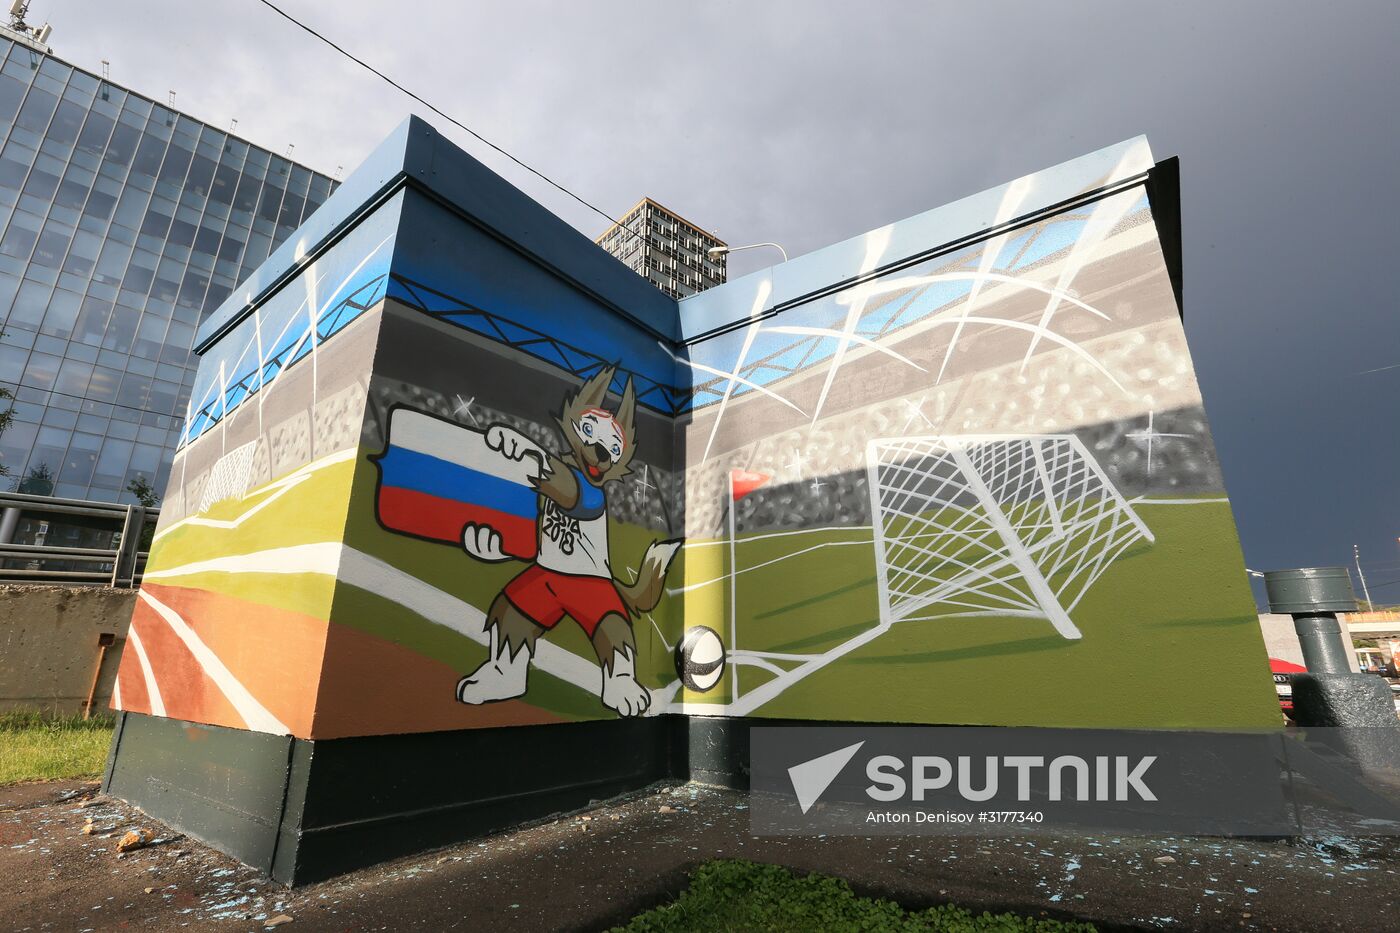 Graffiti dedicated to 2018 World Cup appears in Moscow